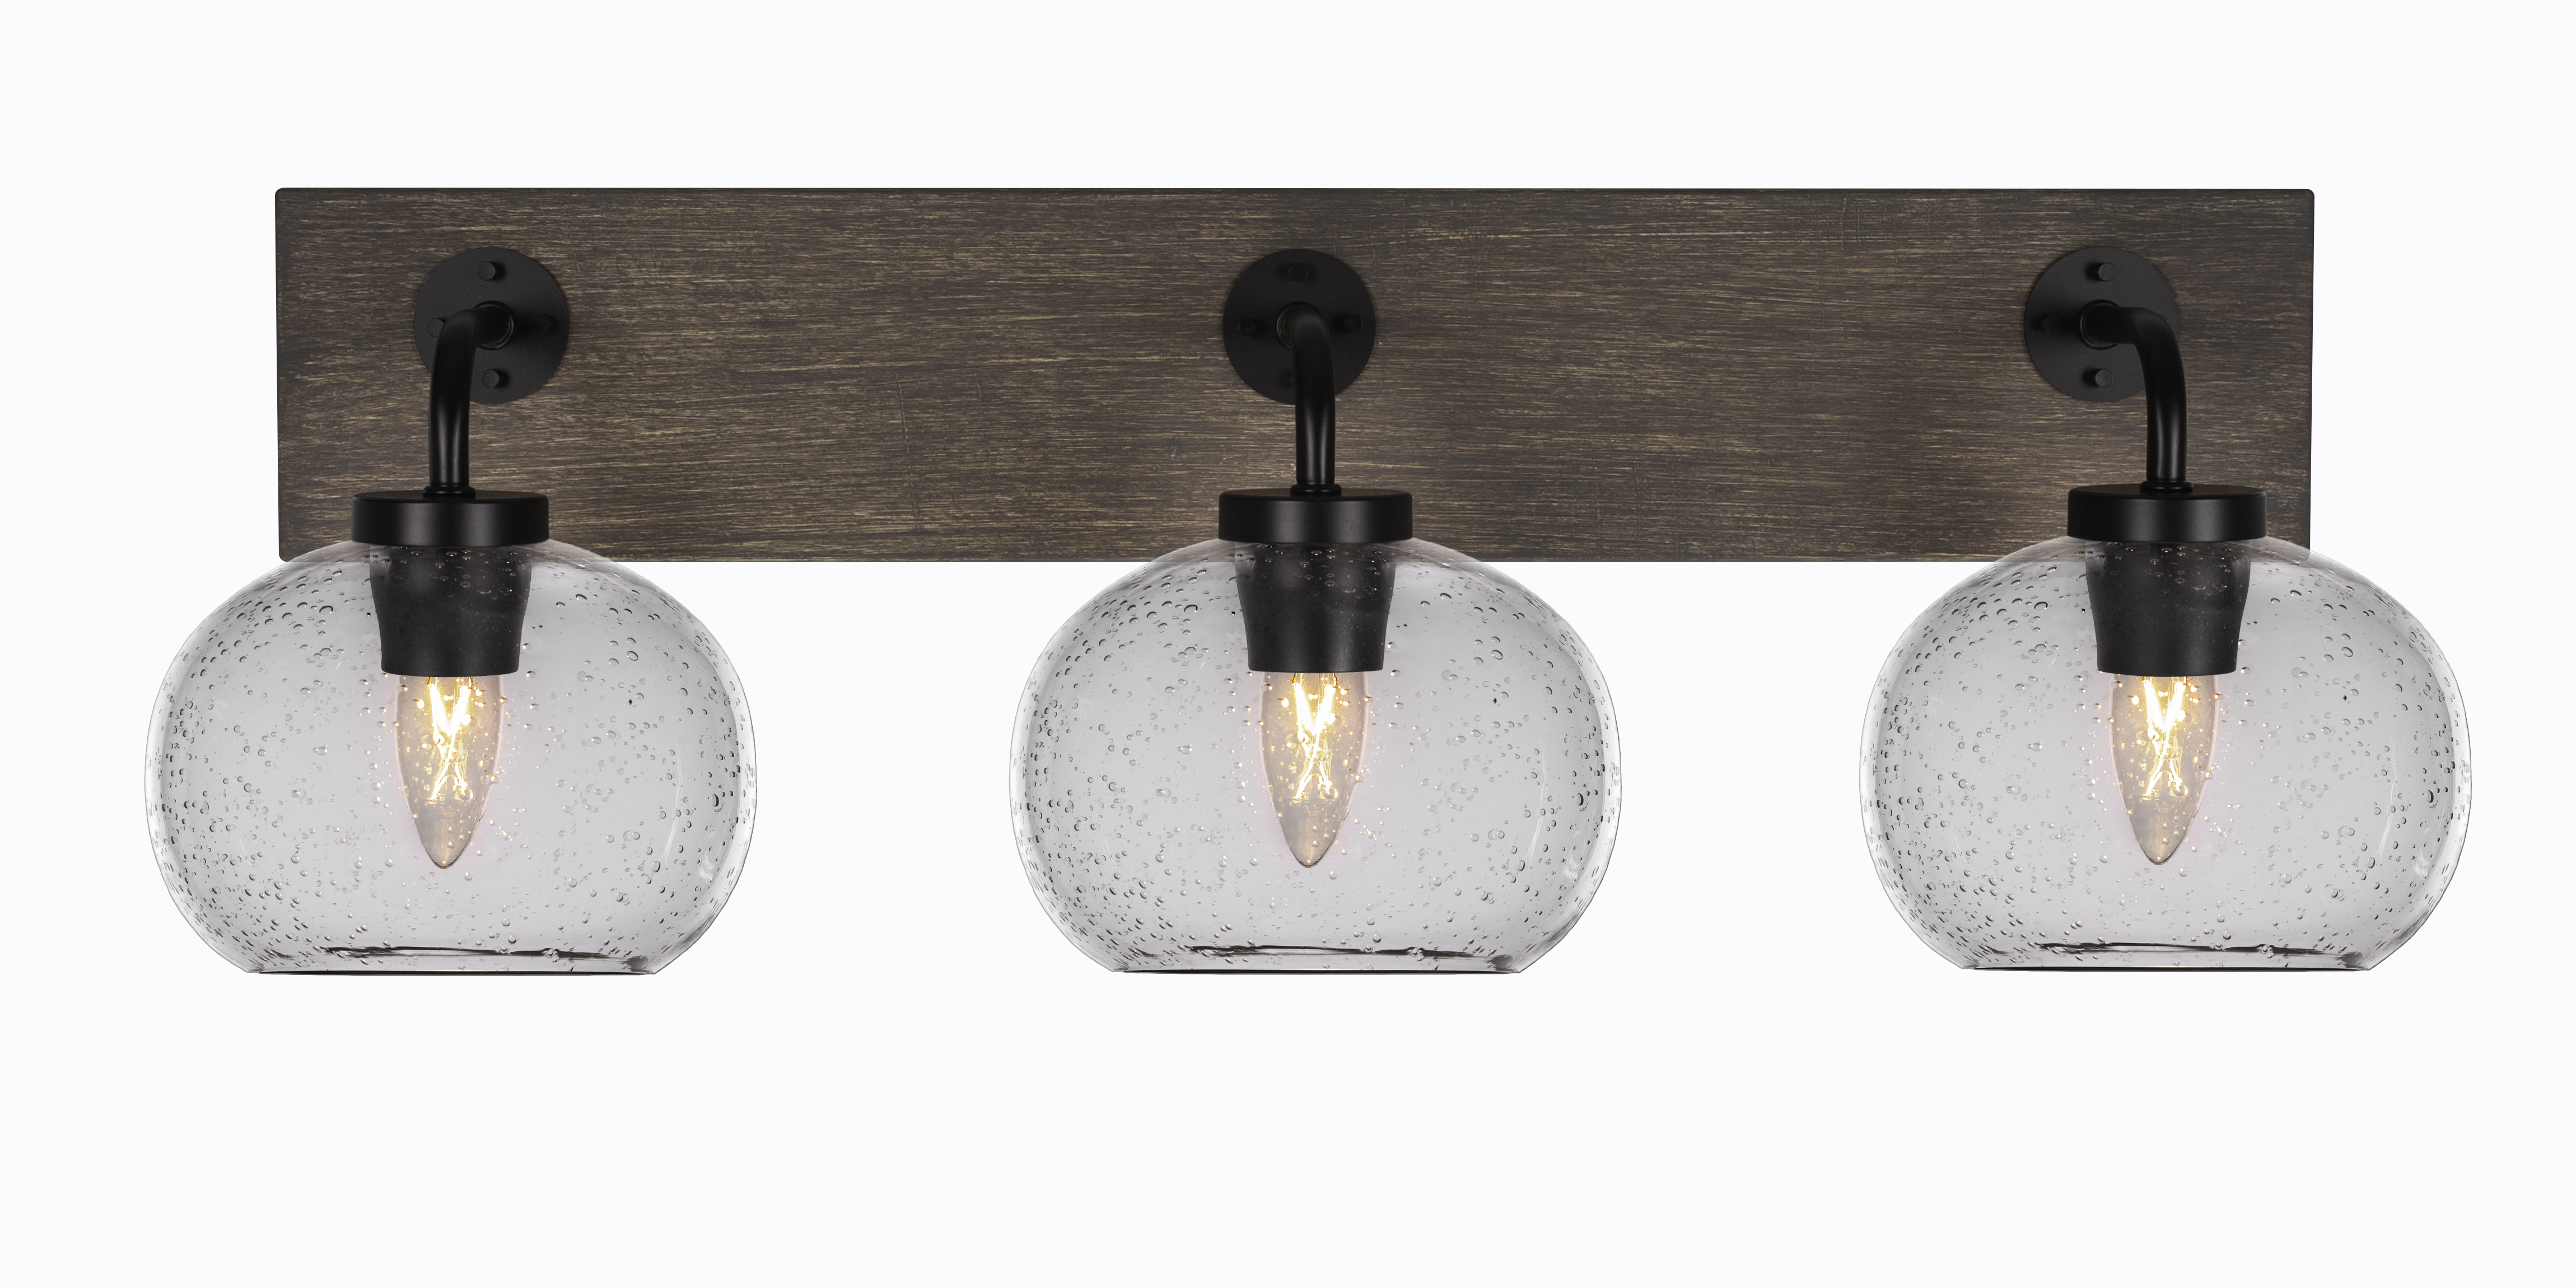 Toltec Lighting 1773-MBDW-202 Oxbridge 3 Light Bath Bar In Matte Black & Painted Distressed Wood-look Metal Finish With 7" Clear Bubble Glass